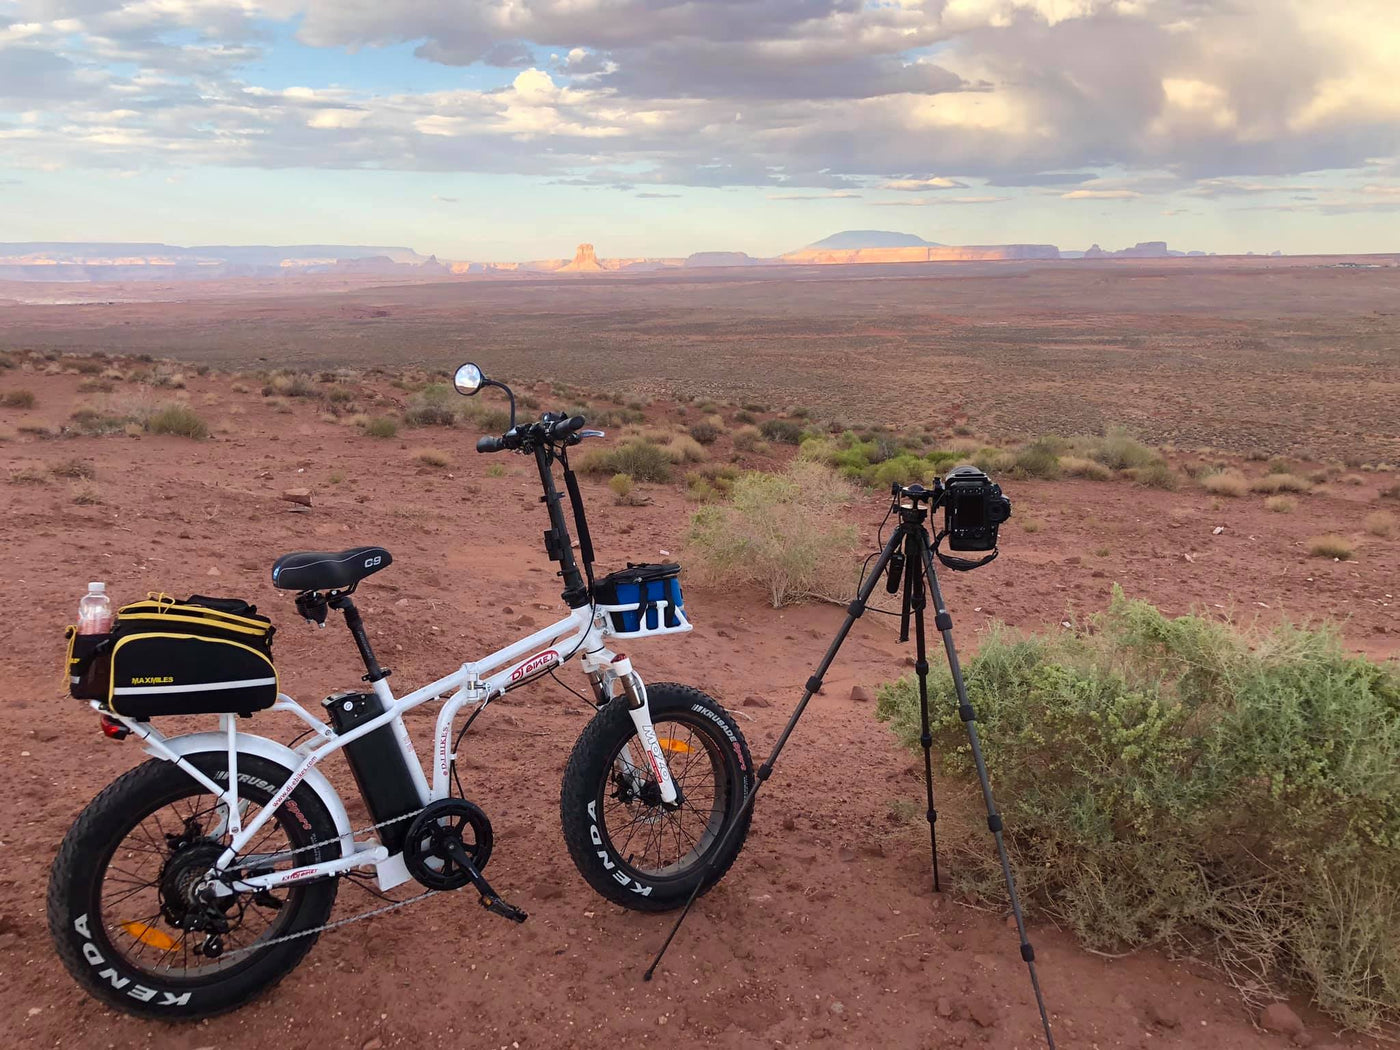 A DJ Folding Bike fat tire e-bike equipped with trunk and front bags next to a camera in the Arizona desert